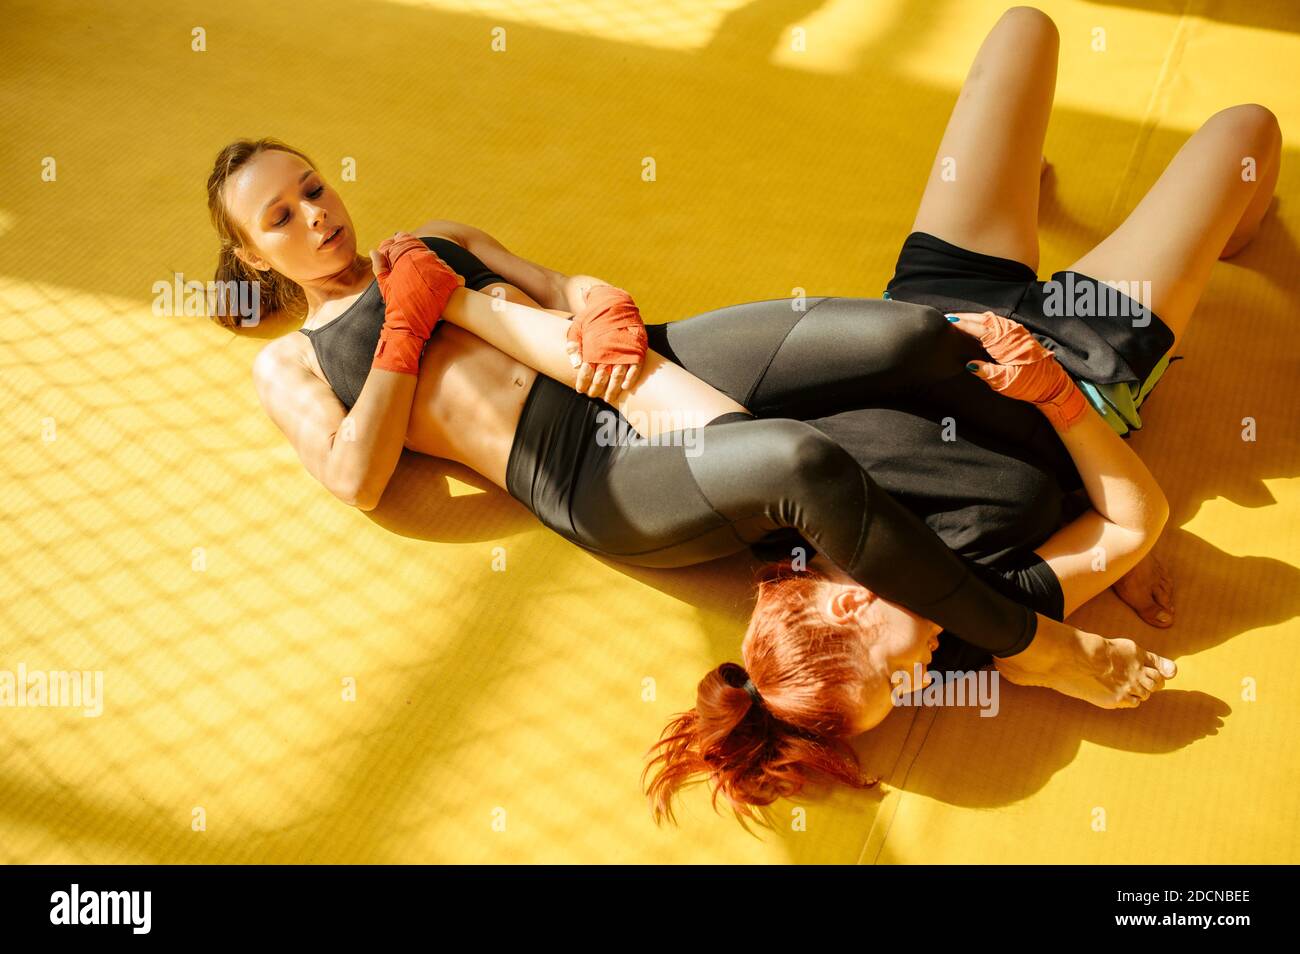 Female MMA fighter performs painful hand grab Stock Photo